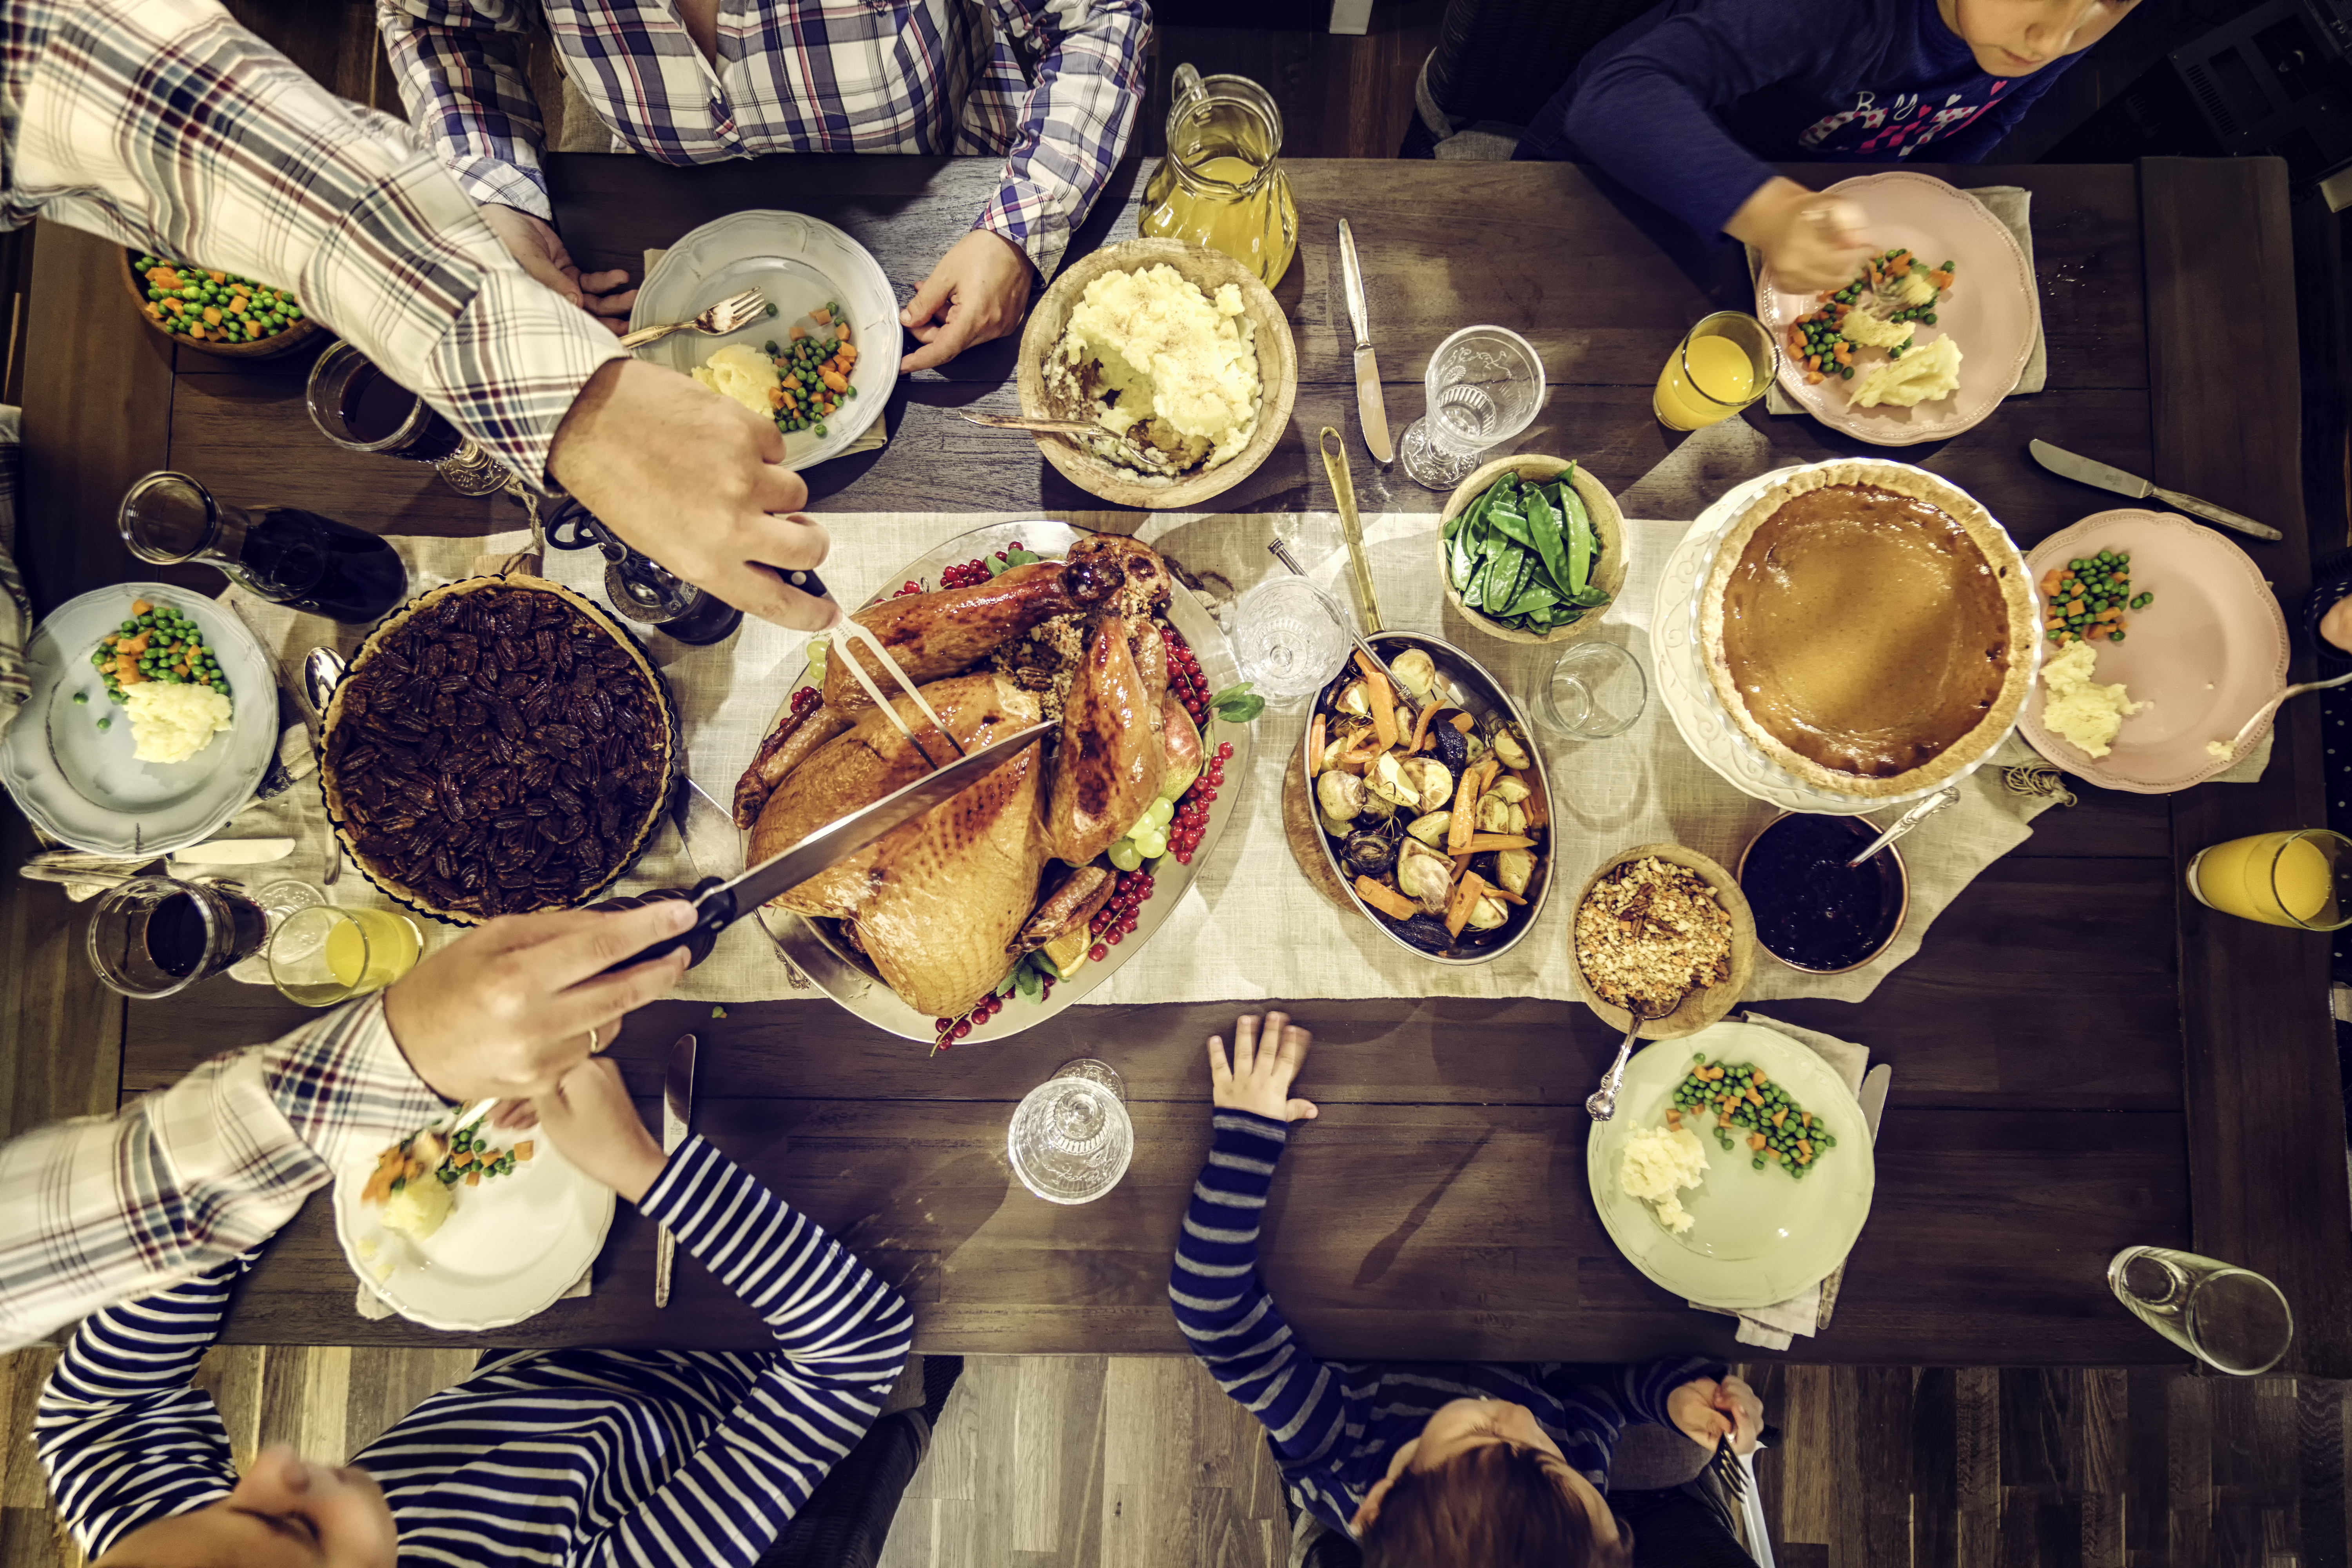 10 Tips for Healthy Holiday Eating